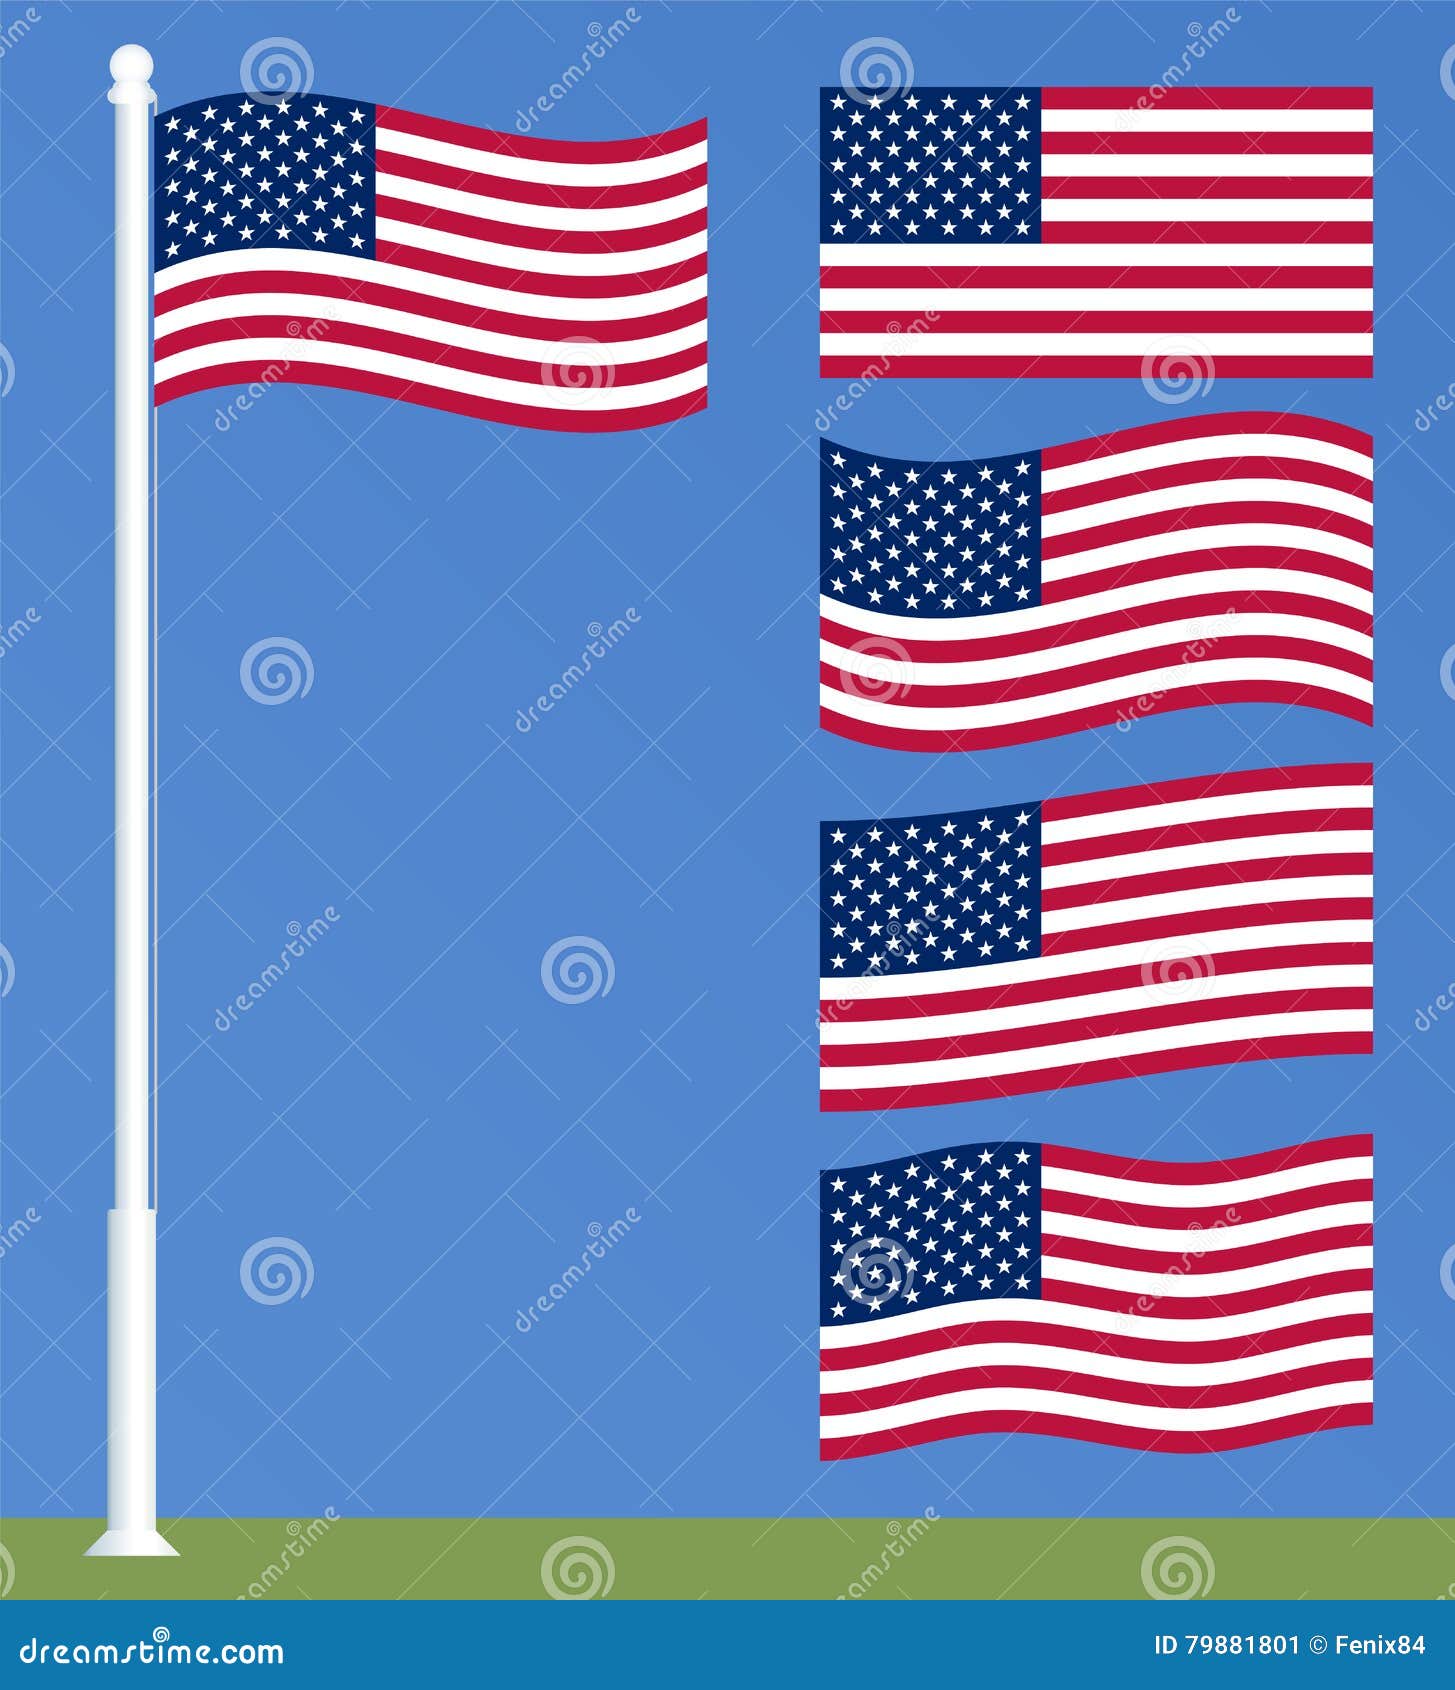 Download US Flag On The Flagpole. Set Of Waving American Flags ...